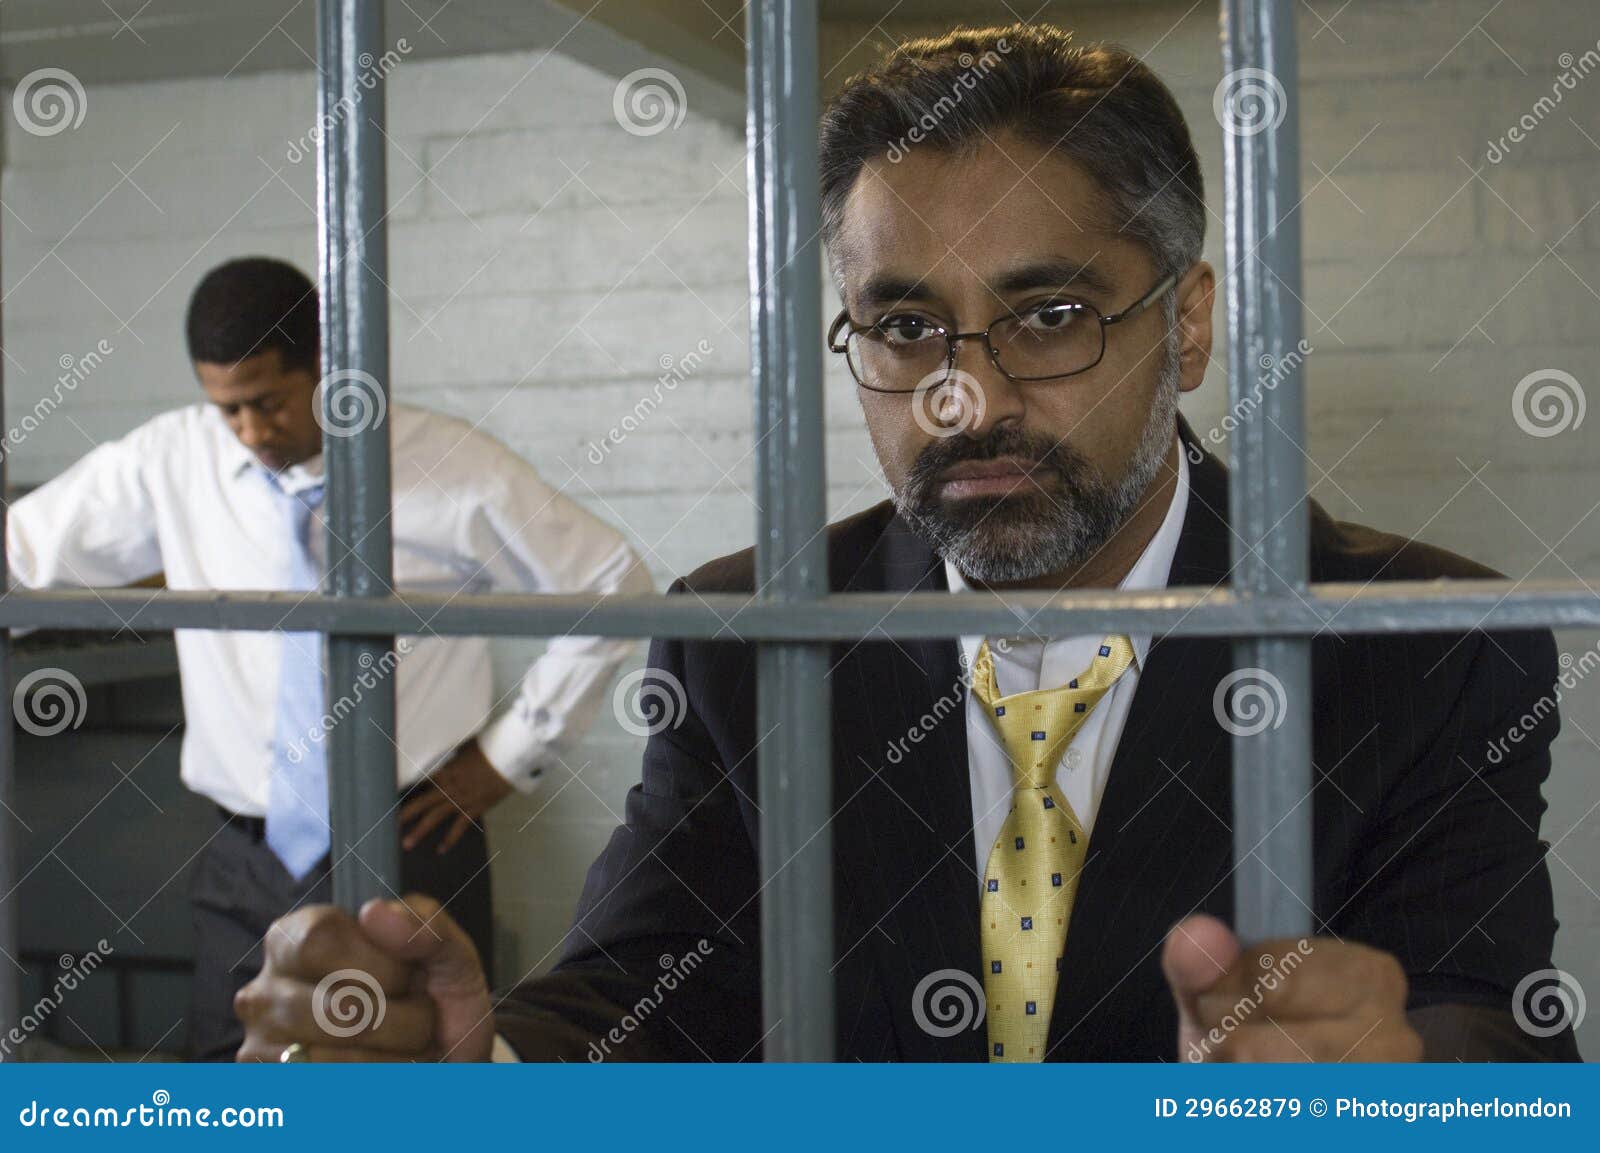 Two Men Behind Bars Royalty Free Stock Images - Image: 29662879